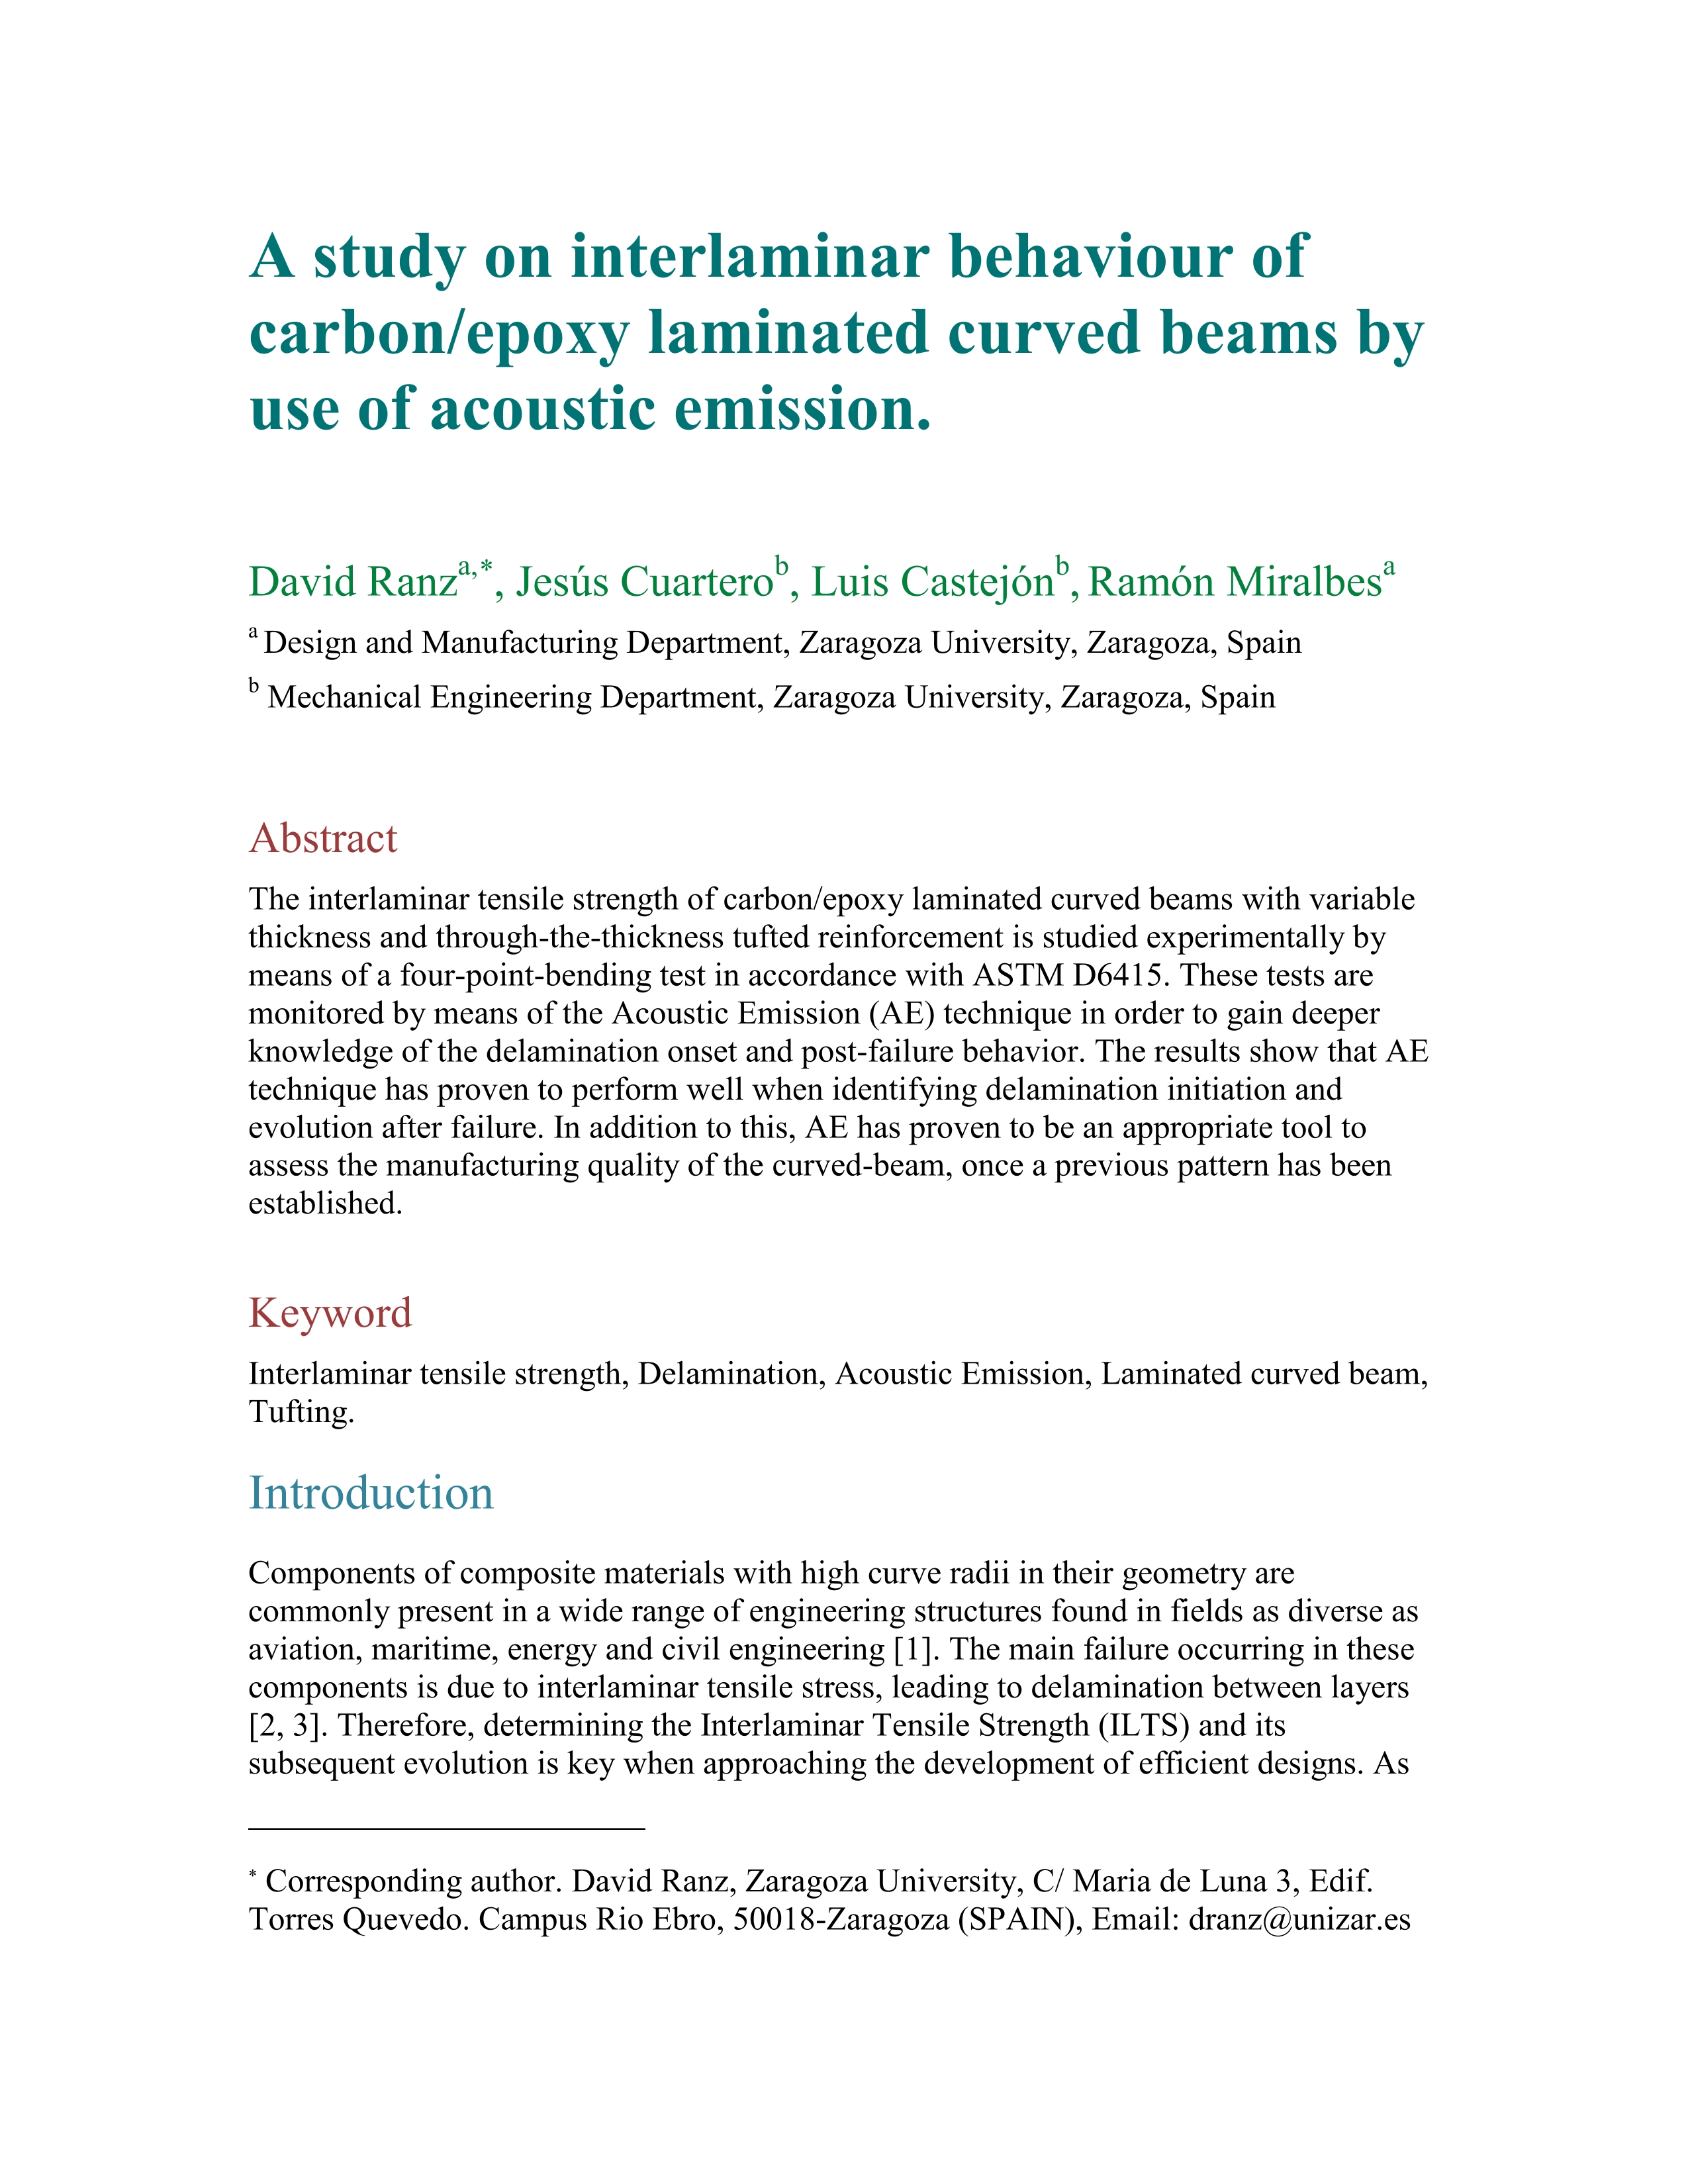 A study on interlaminar behavior of carbon/epoxy laminated curved beams by use of acoustic emission